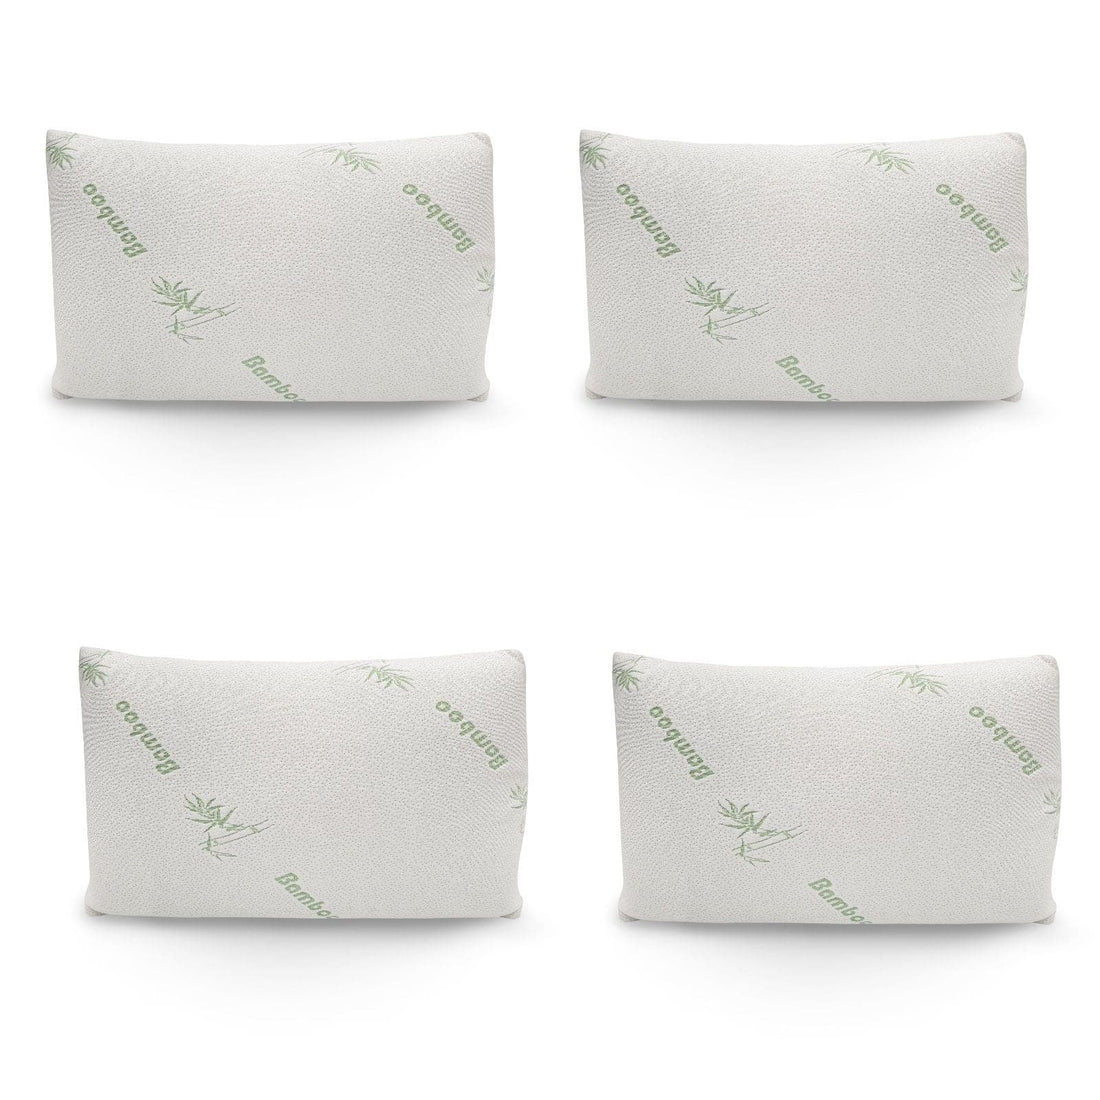 4 x Memory Foam Pillow Bamboos Covered Ultra Soft Hypoallergenic-Bedding-PEROZ Accessories